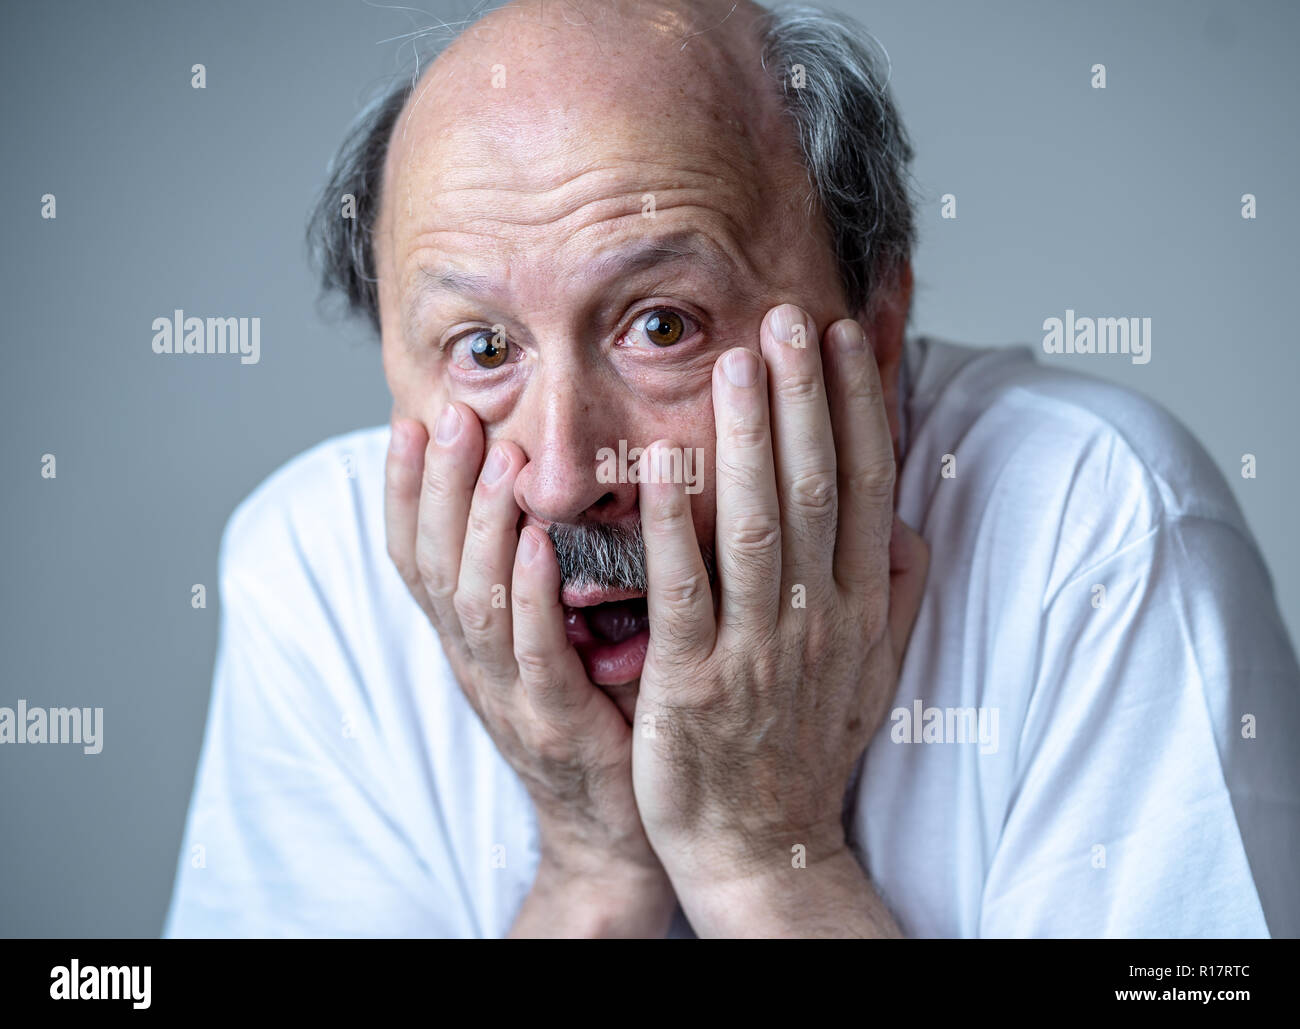 Close up portrait of a scared frightened old man in expression of fear in human emotions and facial expressions isolated in neutral background. Stock Photo